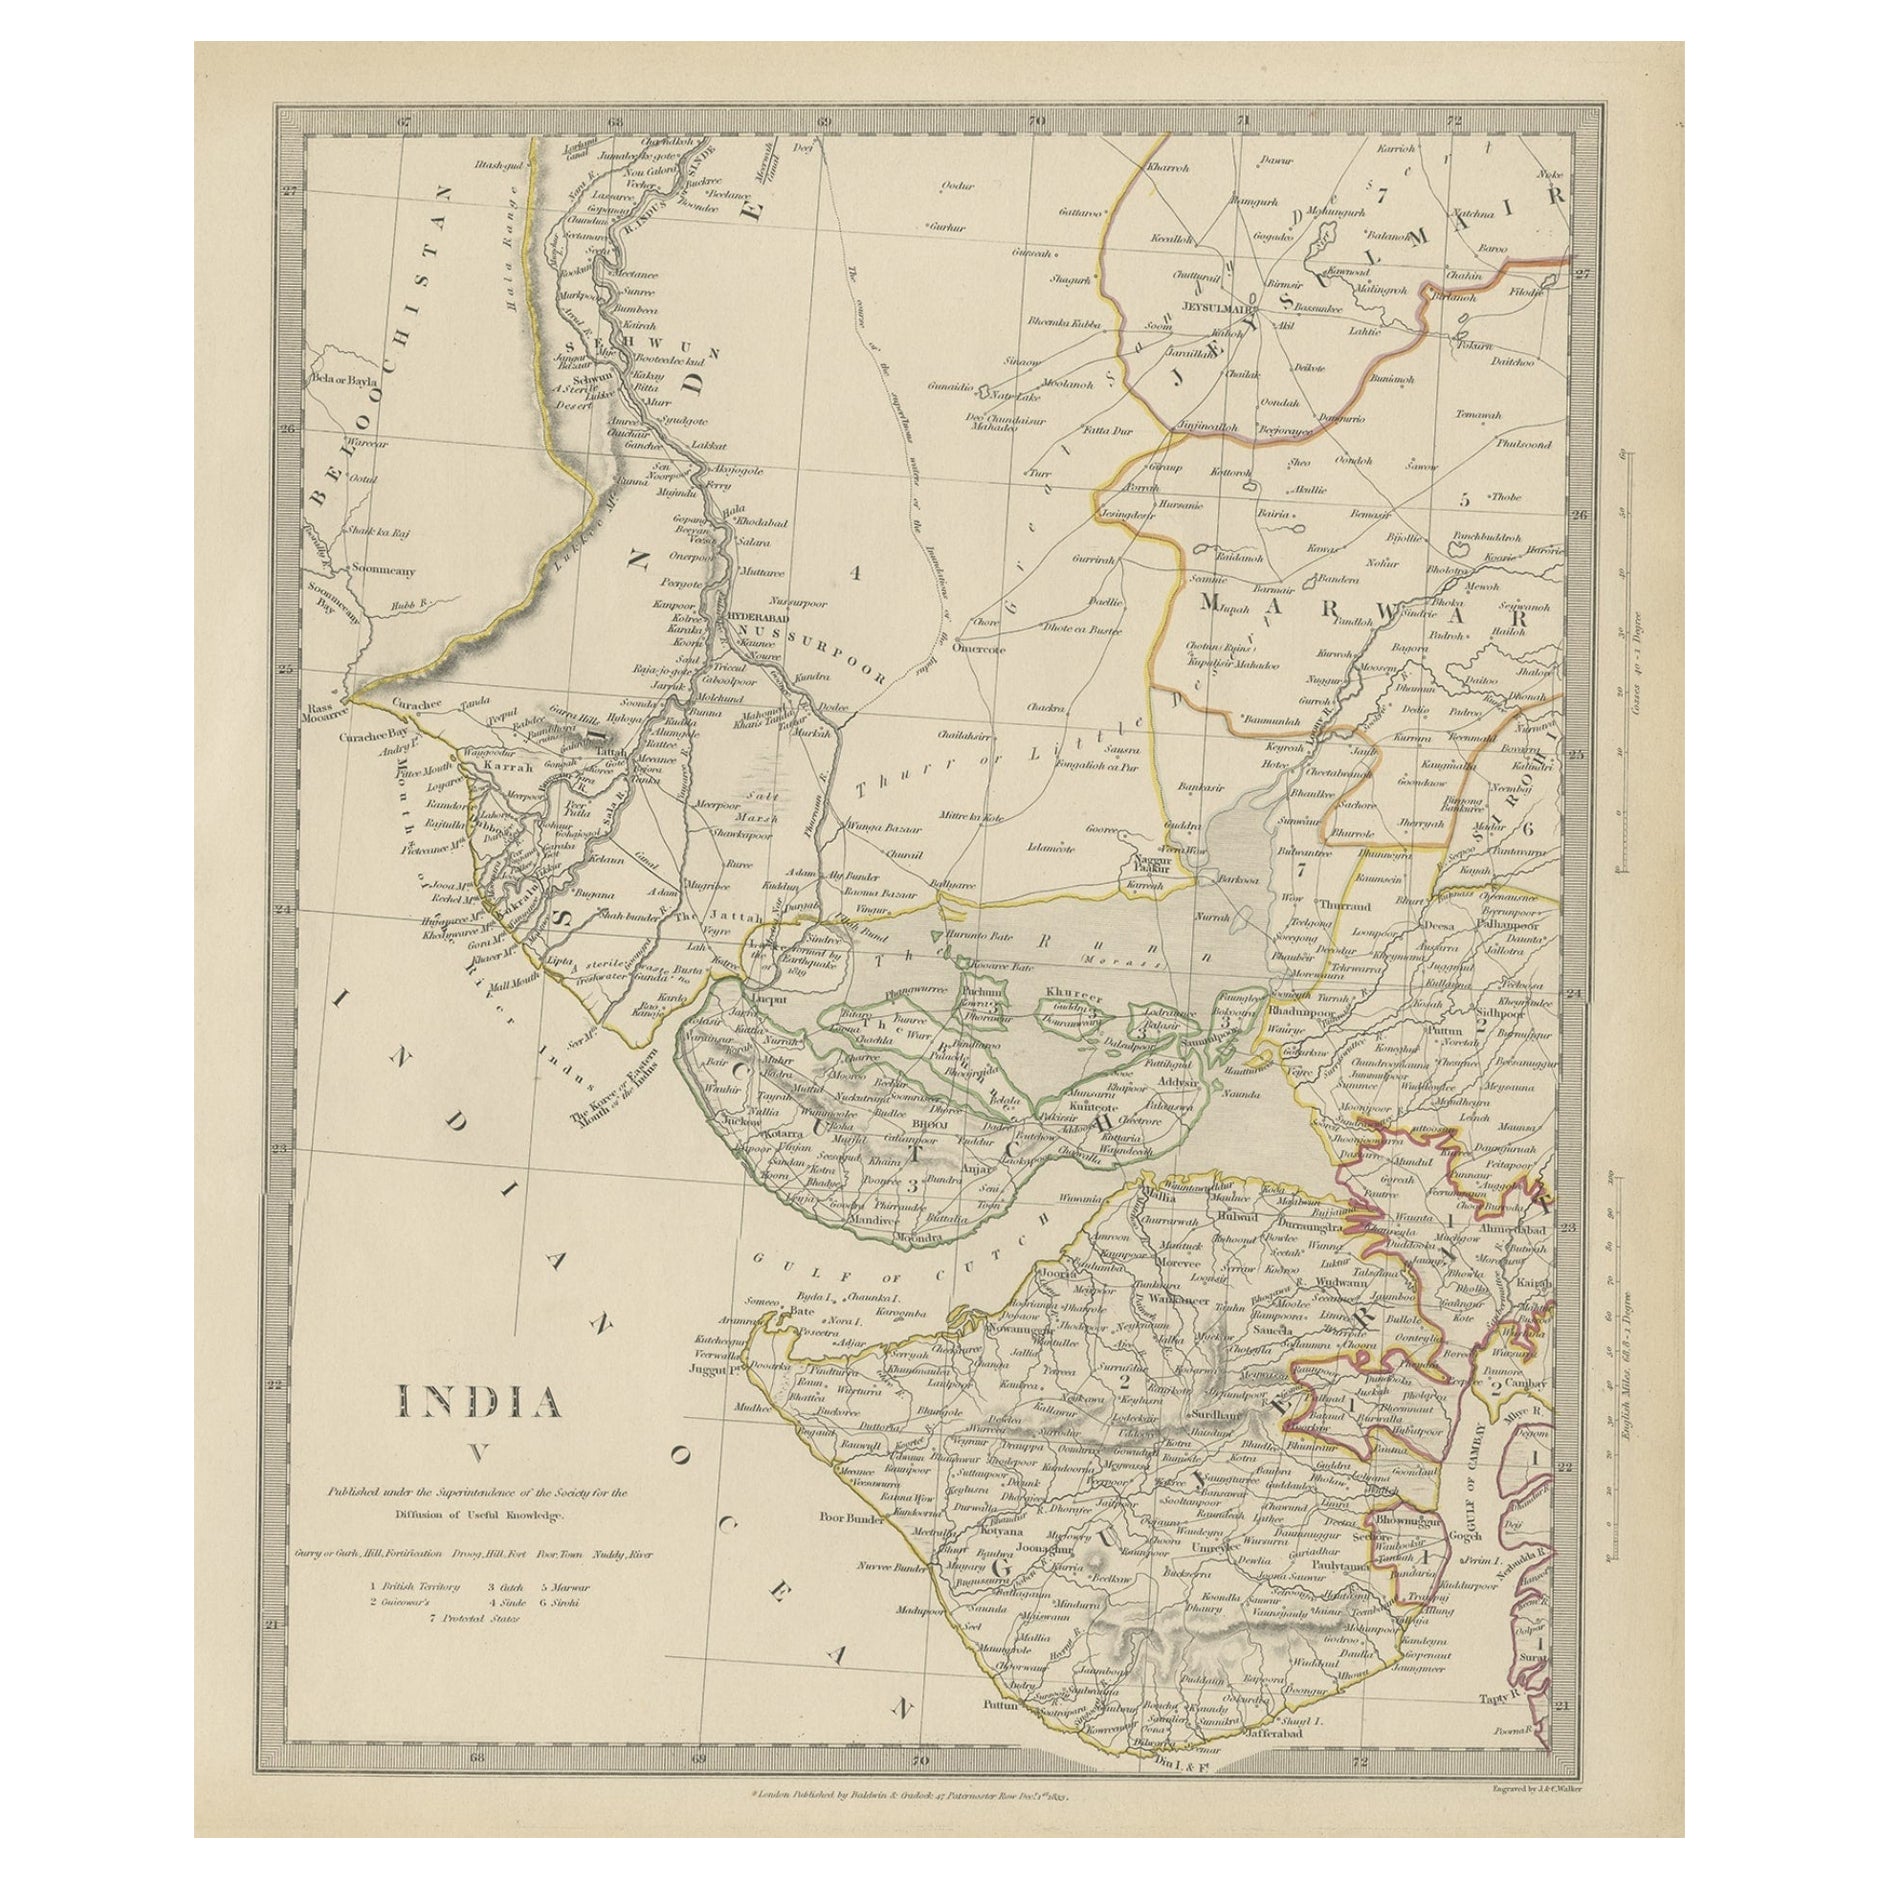 Antique Map of the Region of Gujarat and Cutch in India, 1833